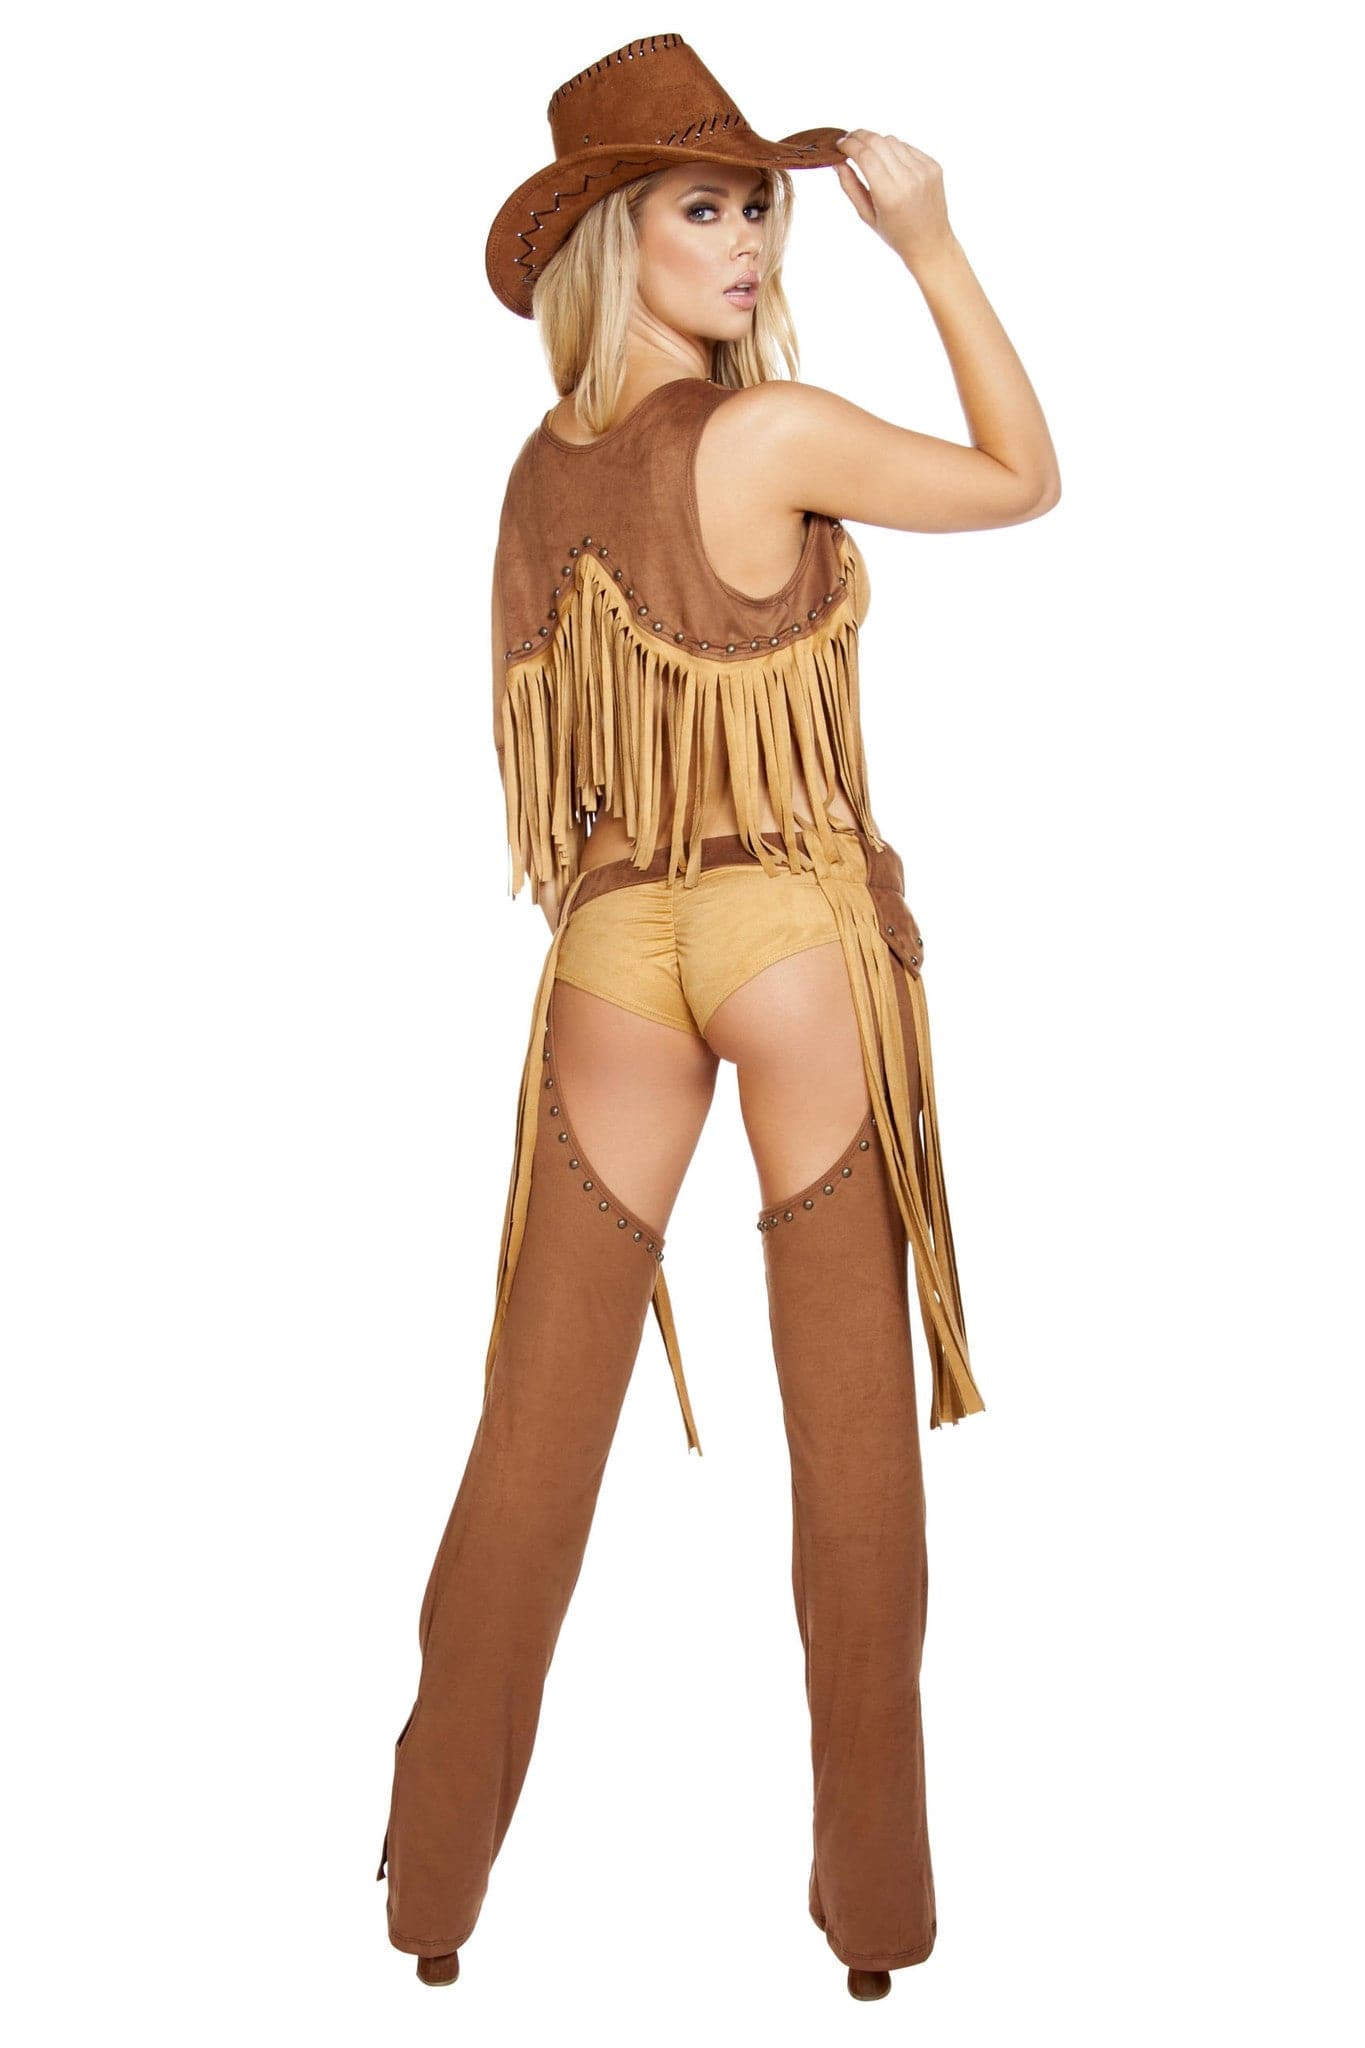 5pc. Wild Western Temptress Cowgirl Women's Costume - For Love of Lingerie